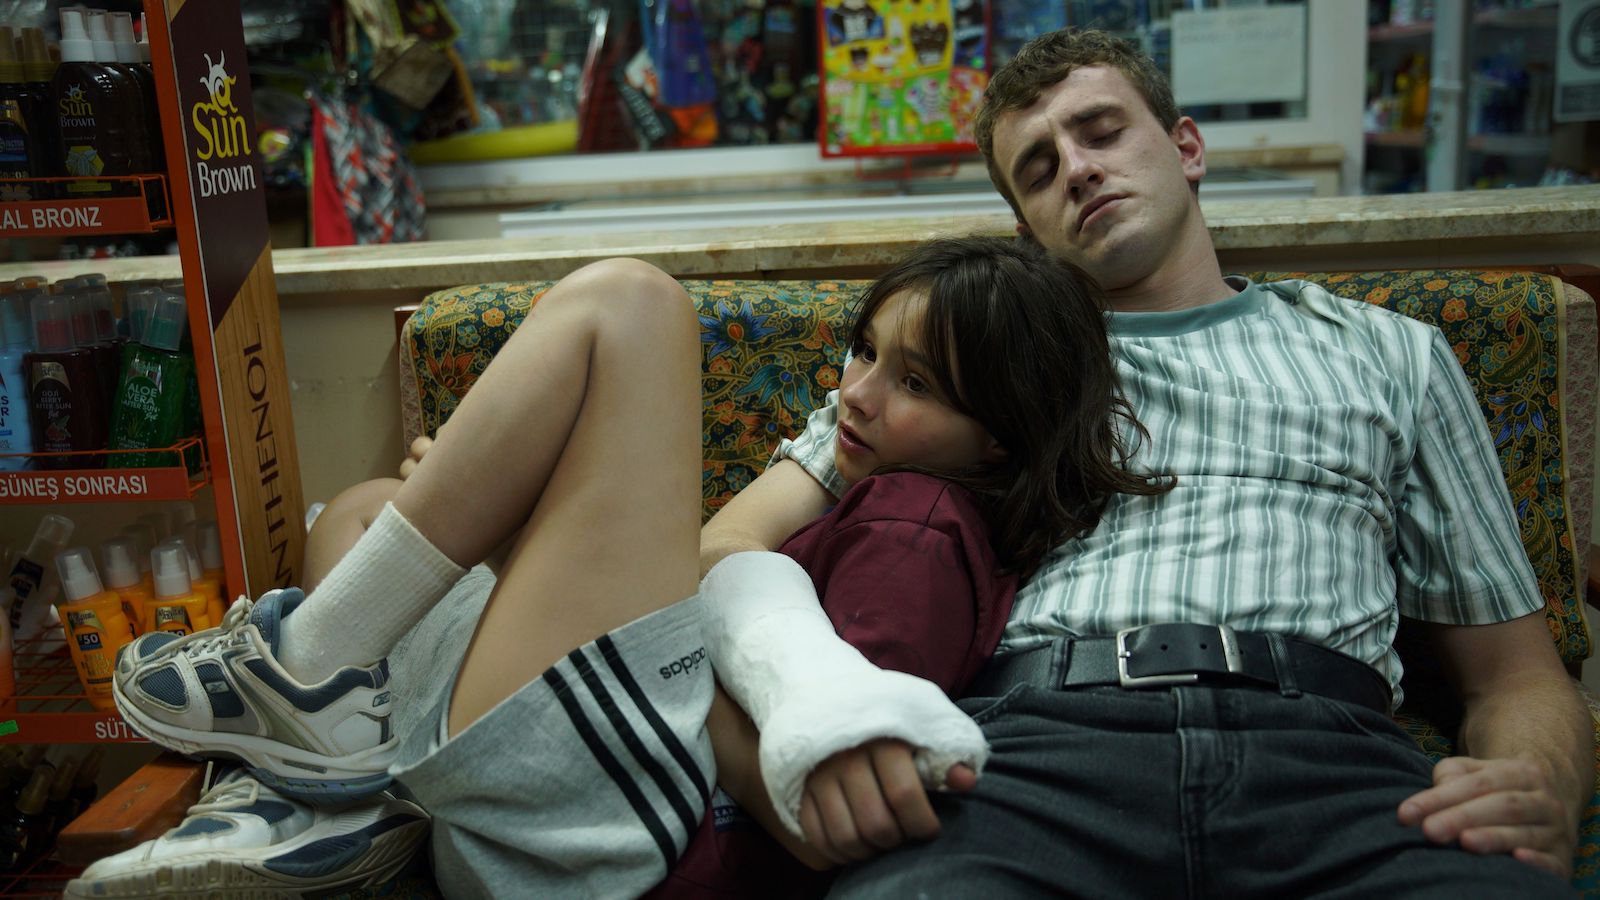 A man in an arm cast holding a young girl as they recline on a couch